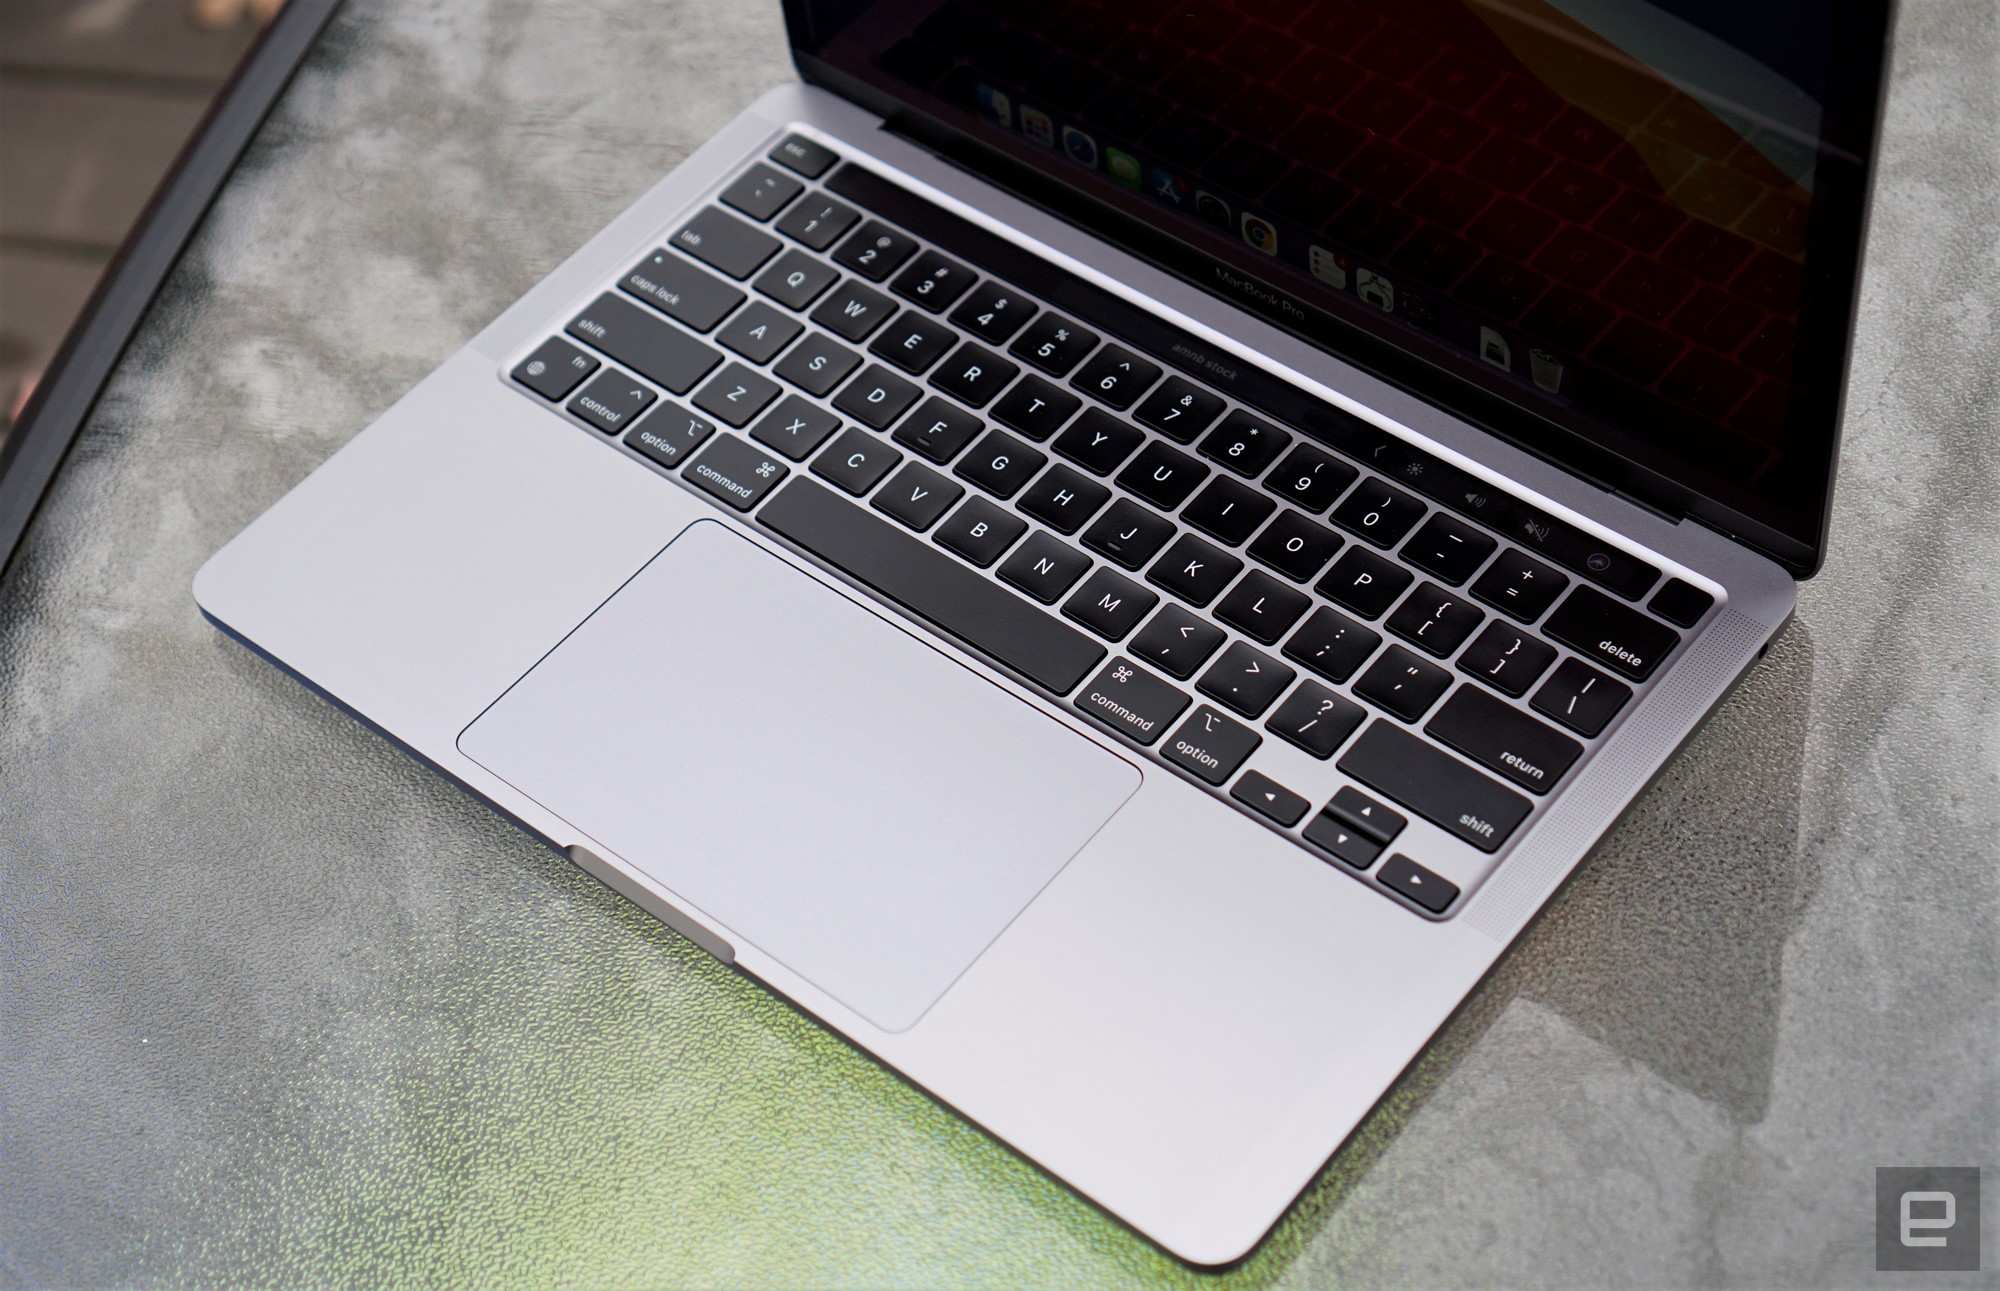 Apple MacBook Pro M1 review (13-inch, 2020)